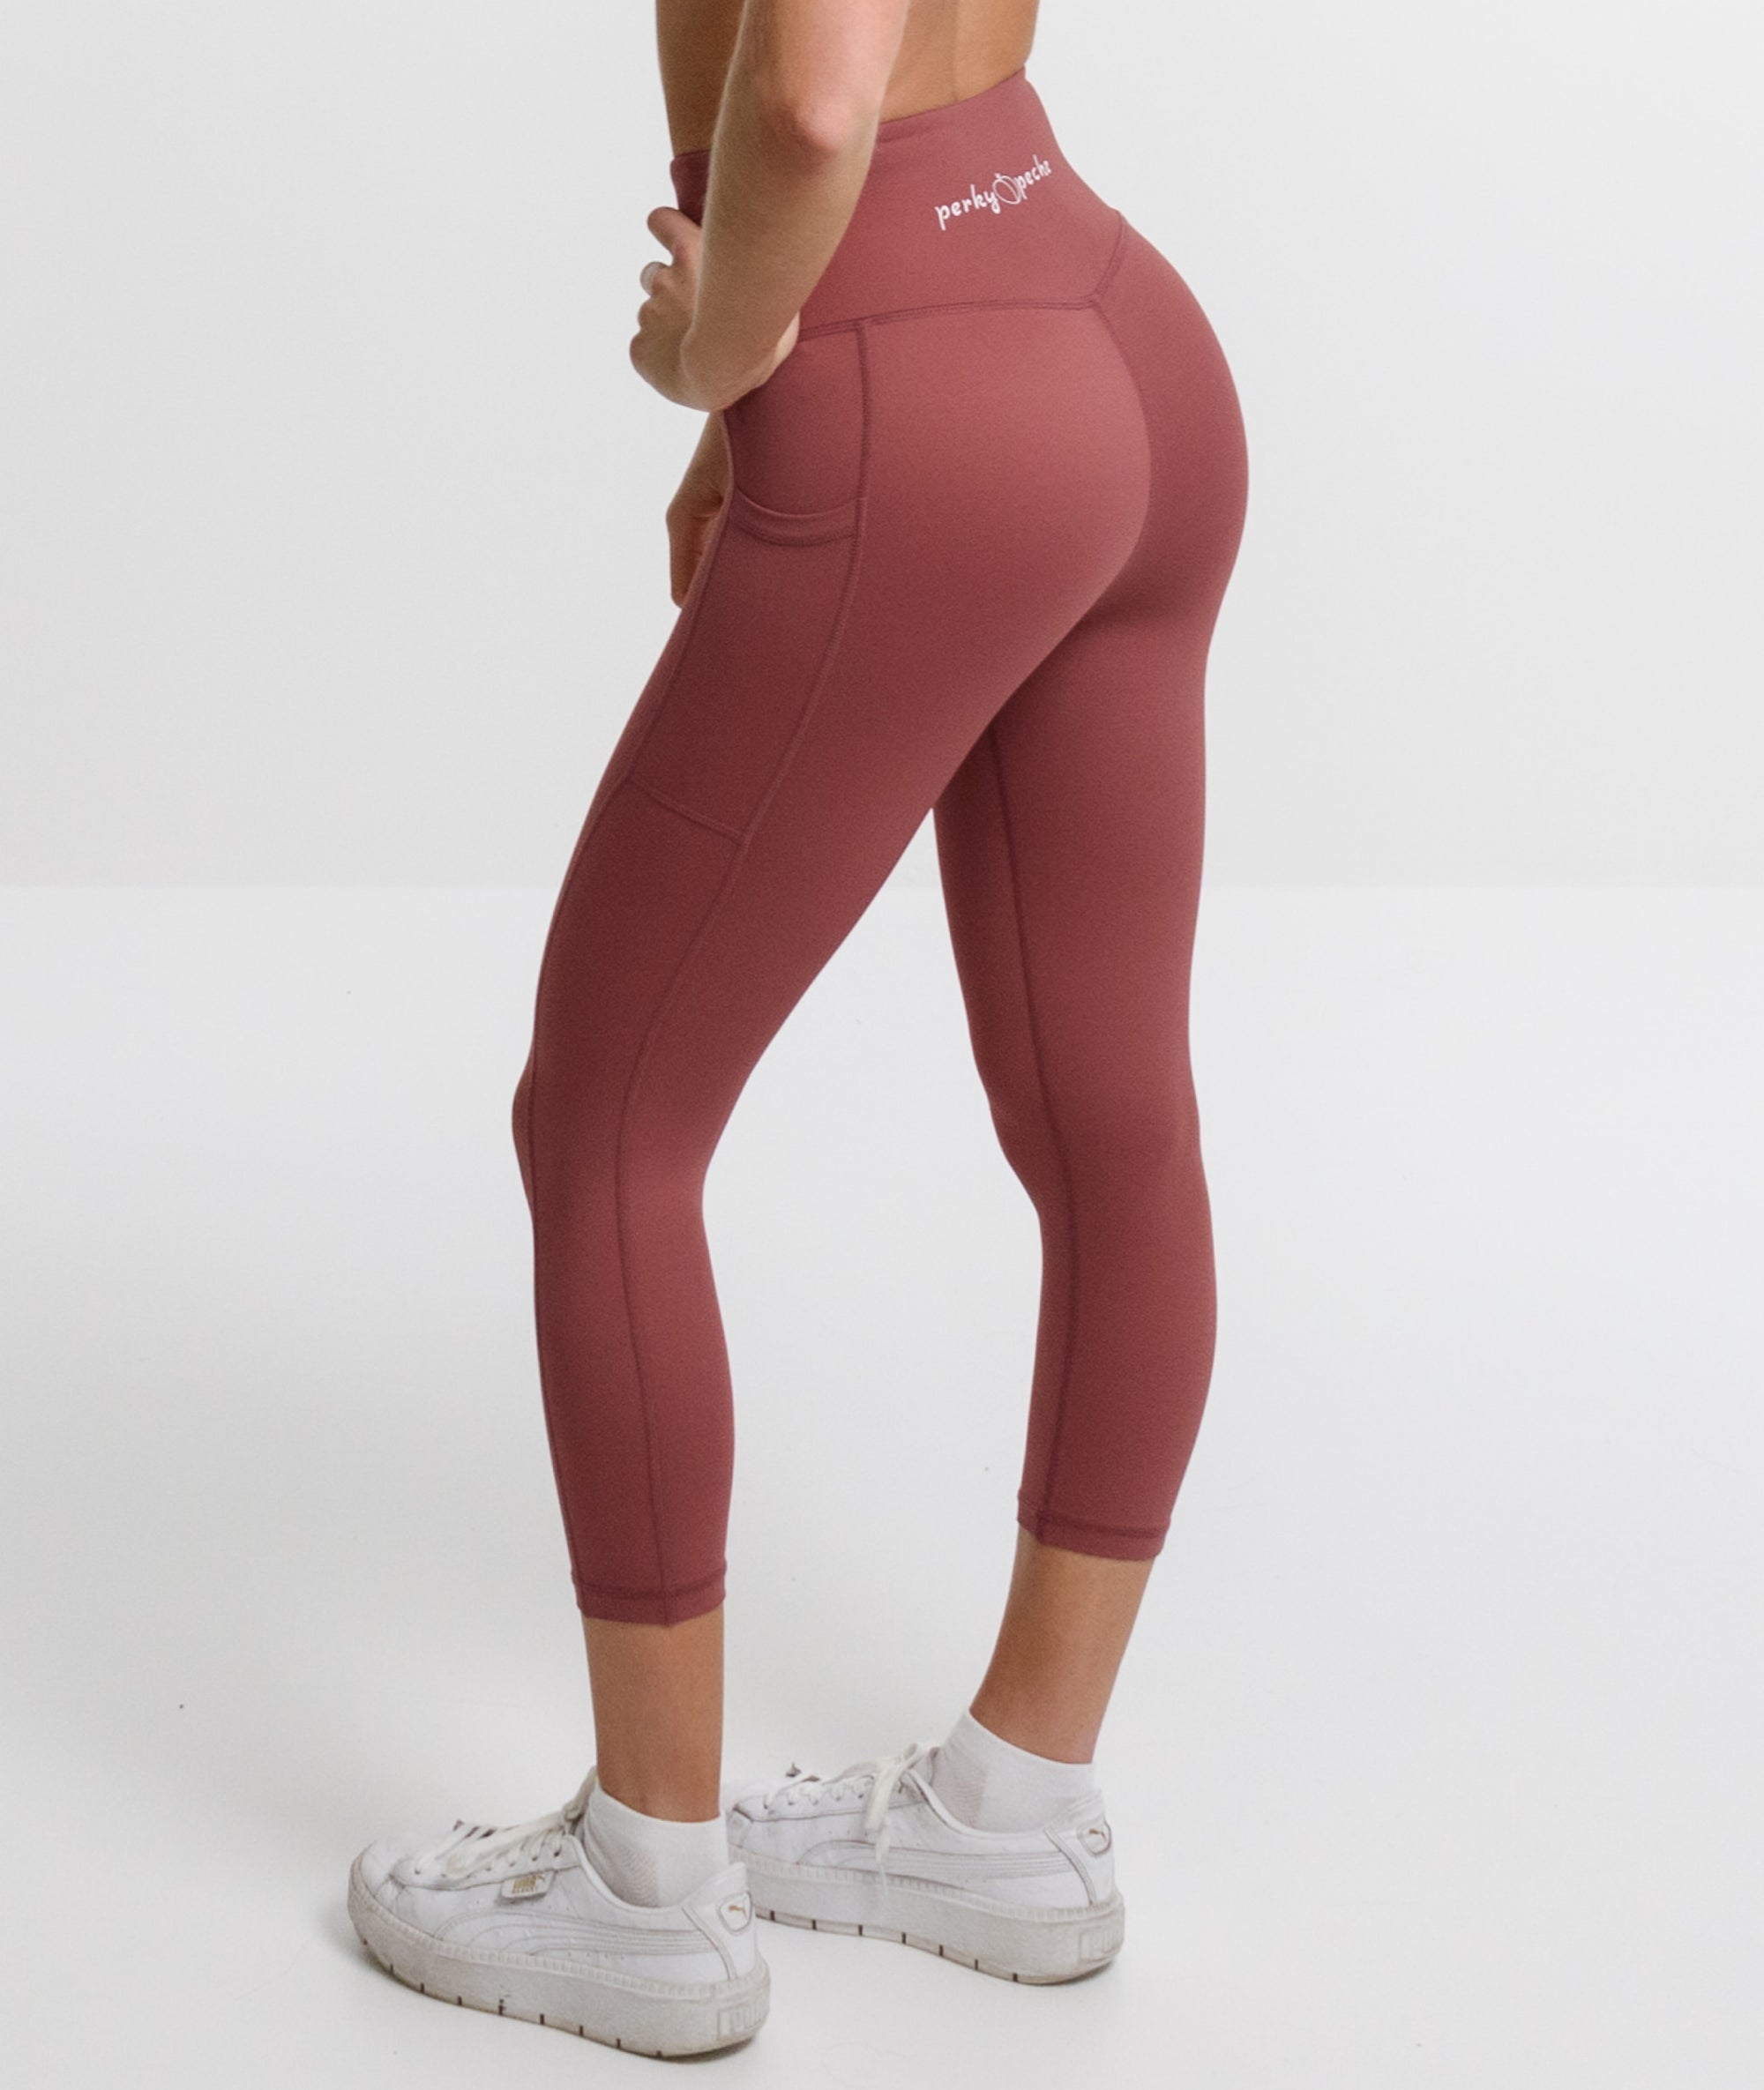 7/8th High Waist Tilly Tight - Burnt Red